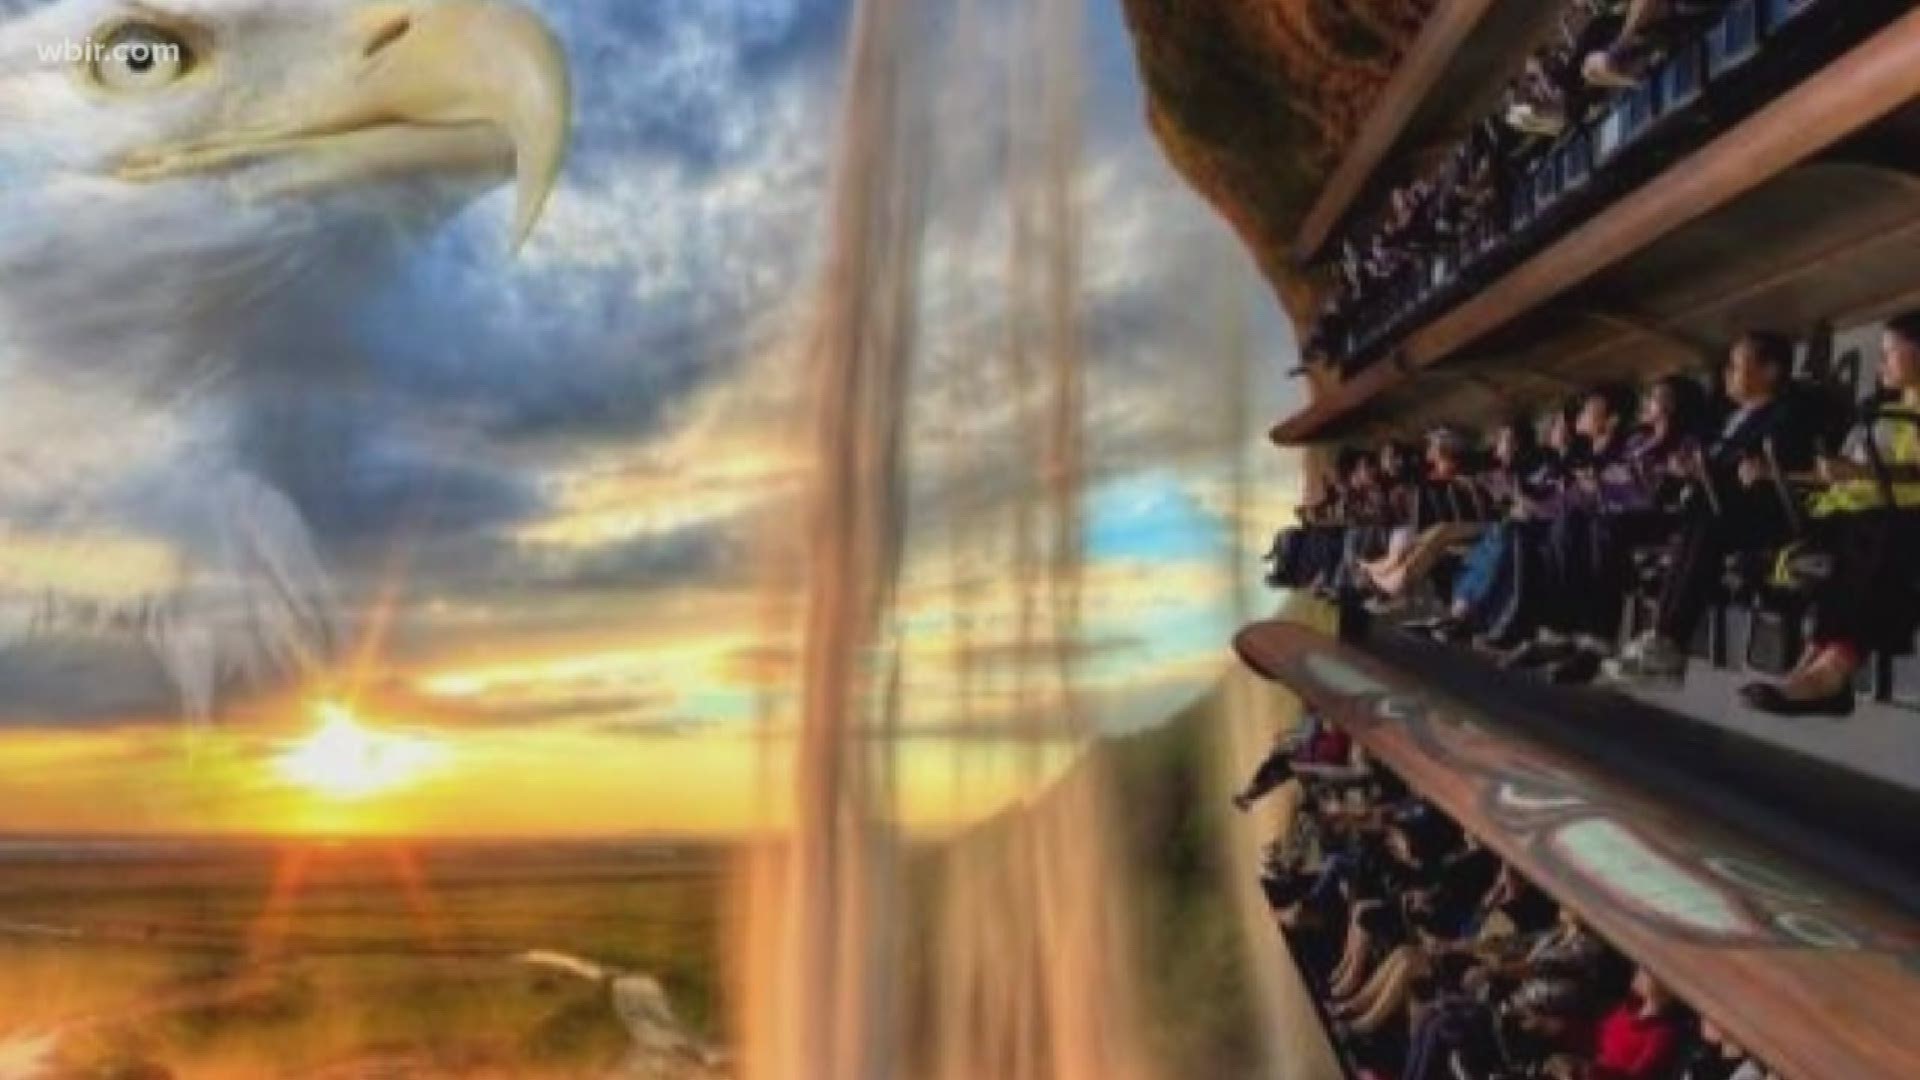 New flying theater ride coming to The Island in Pigeon